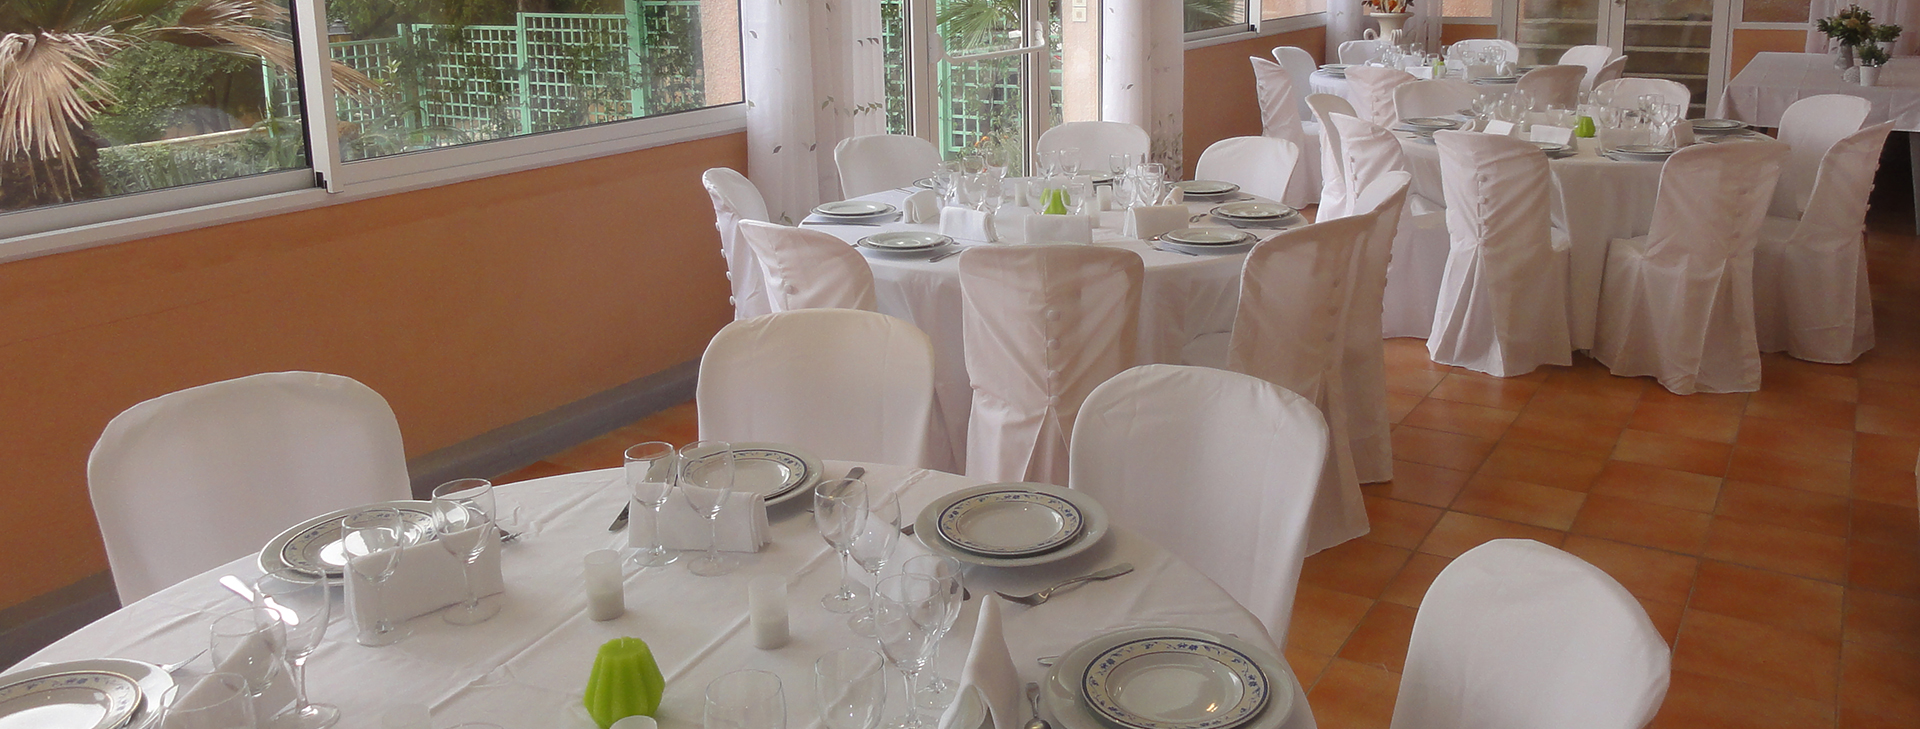 The room for the organization of private events: family meals, Logis du Mas banquet, guest rooms in Sète